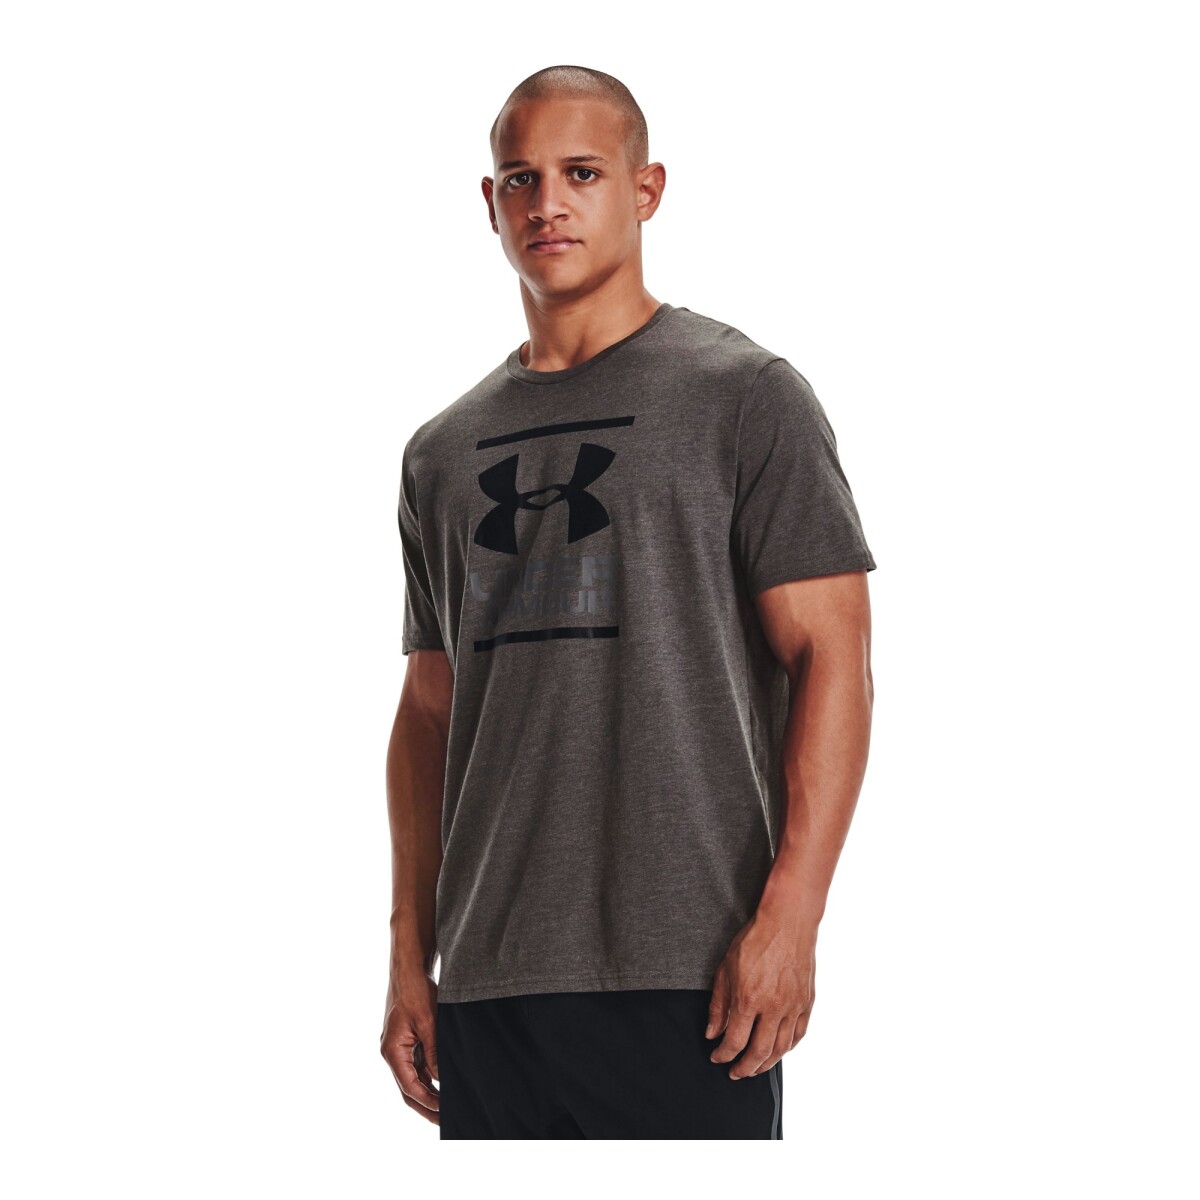 Remera Under Armour Gl Foundation Ss - GRIS 